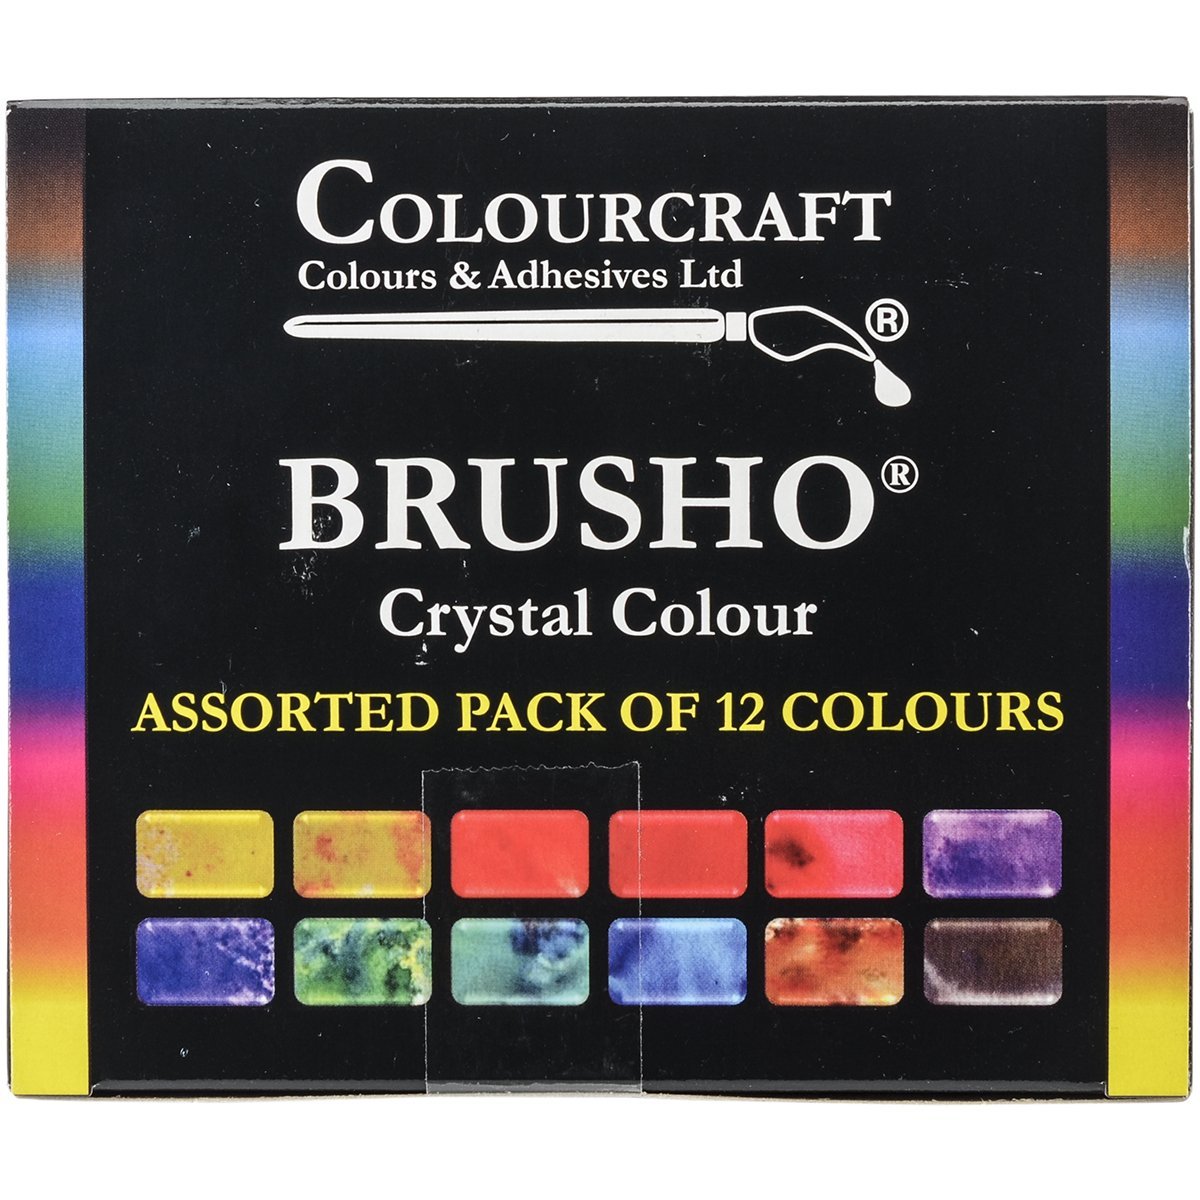 Brusho by Colourcraft BRU85000 Crystal Colour Assorted Pack of 12 Colours